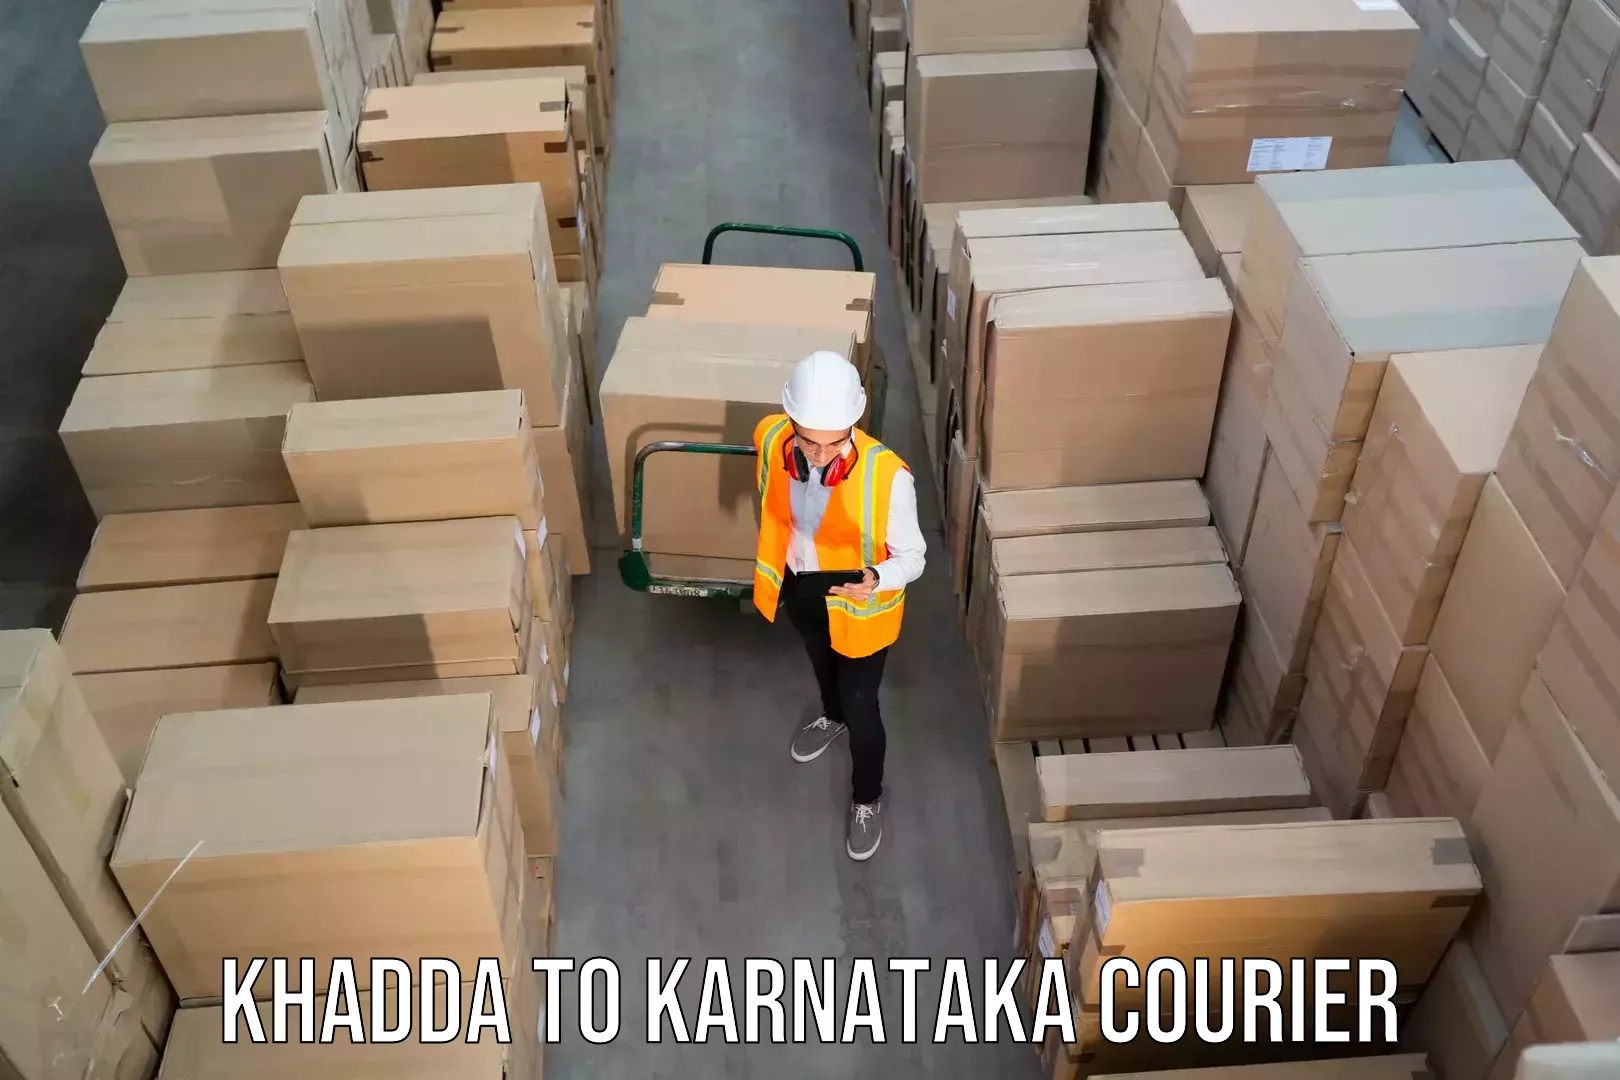 Sustainable delivery practices Khadda to Devanahalli